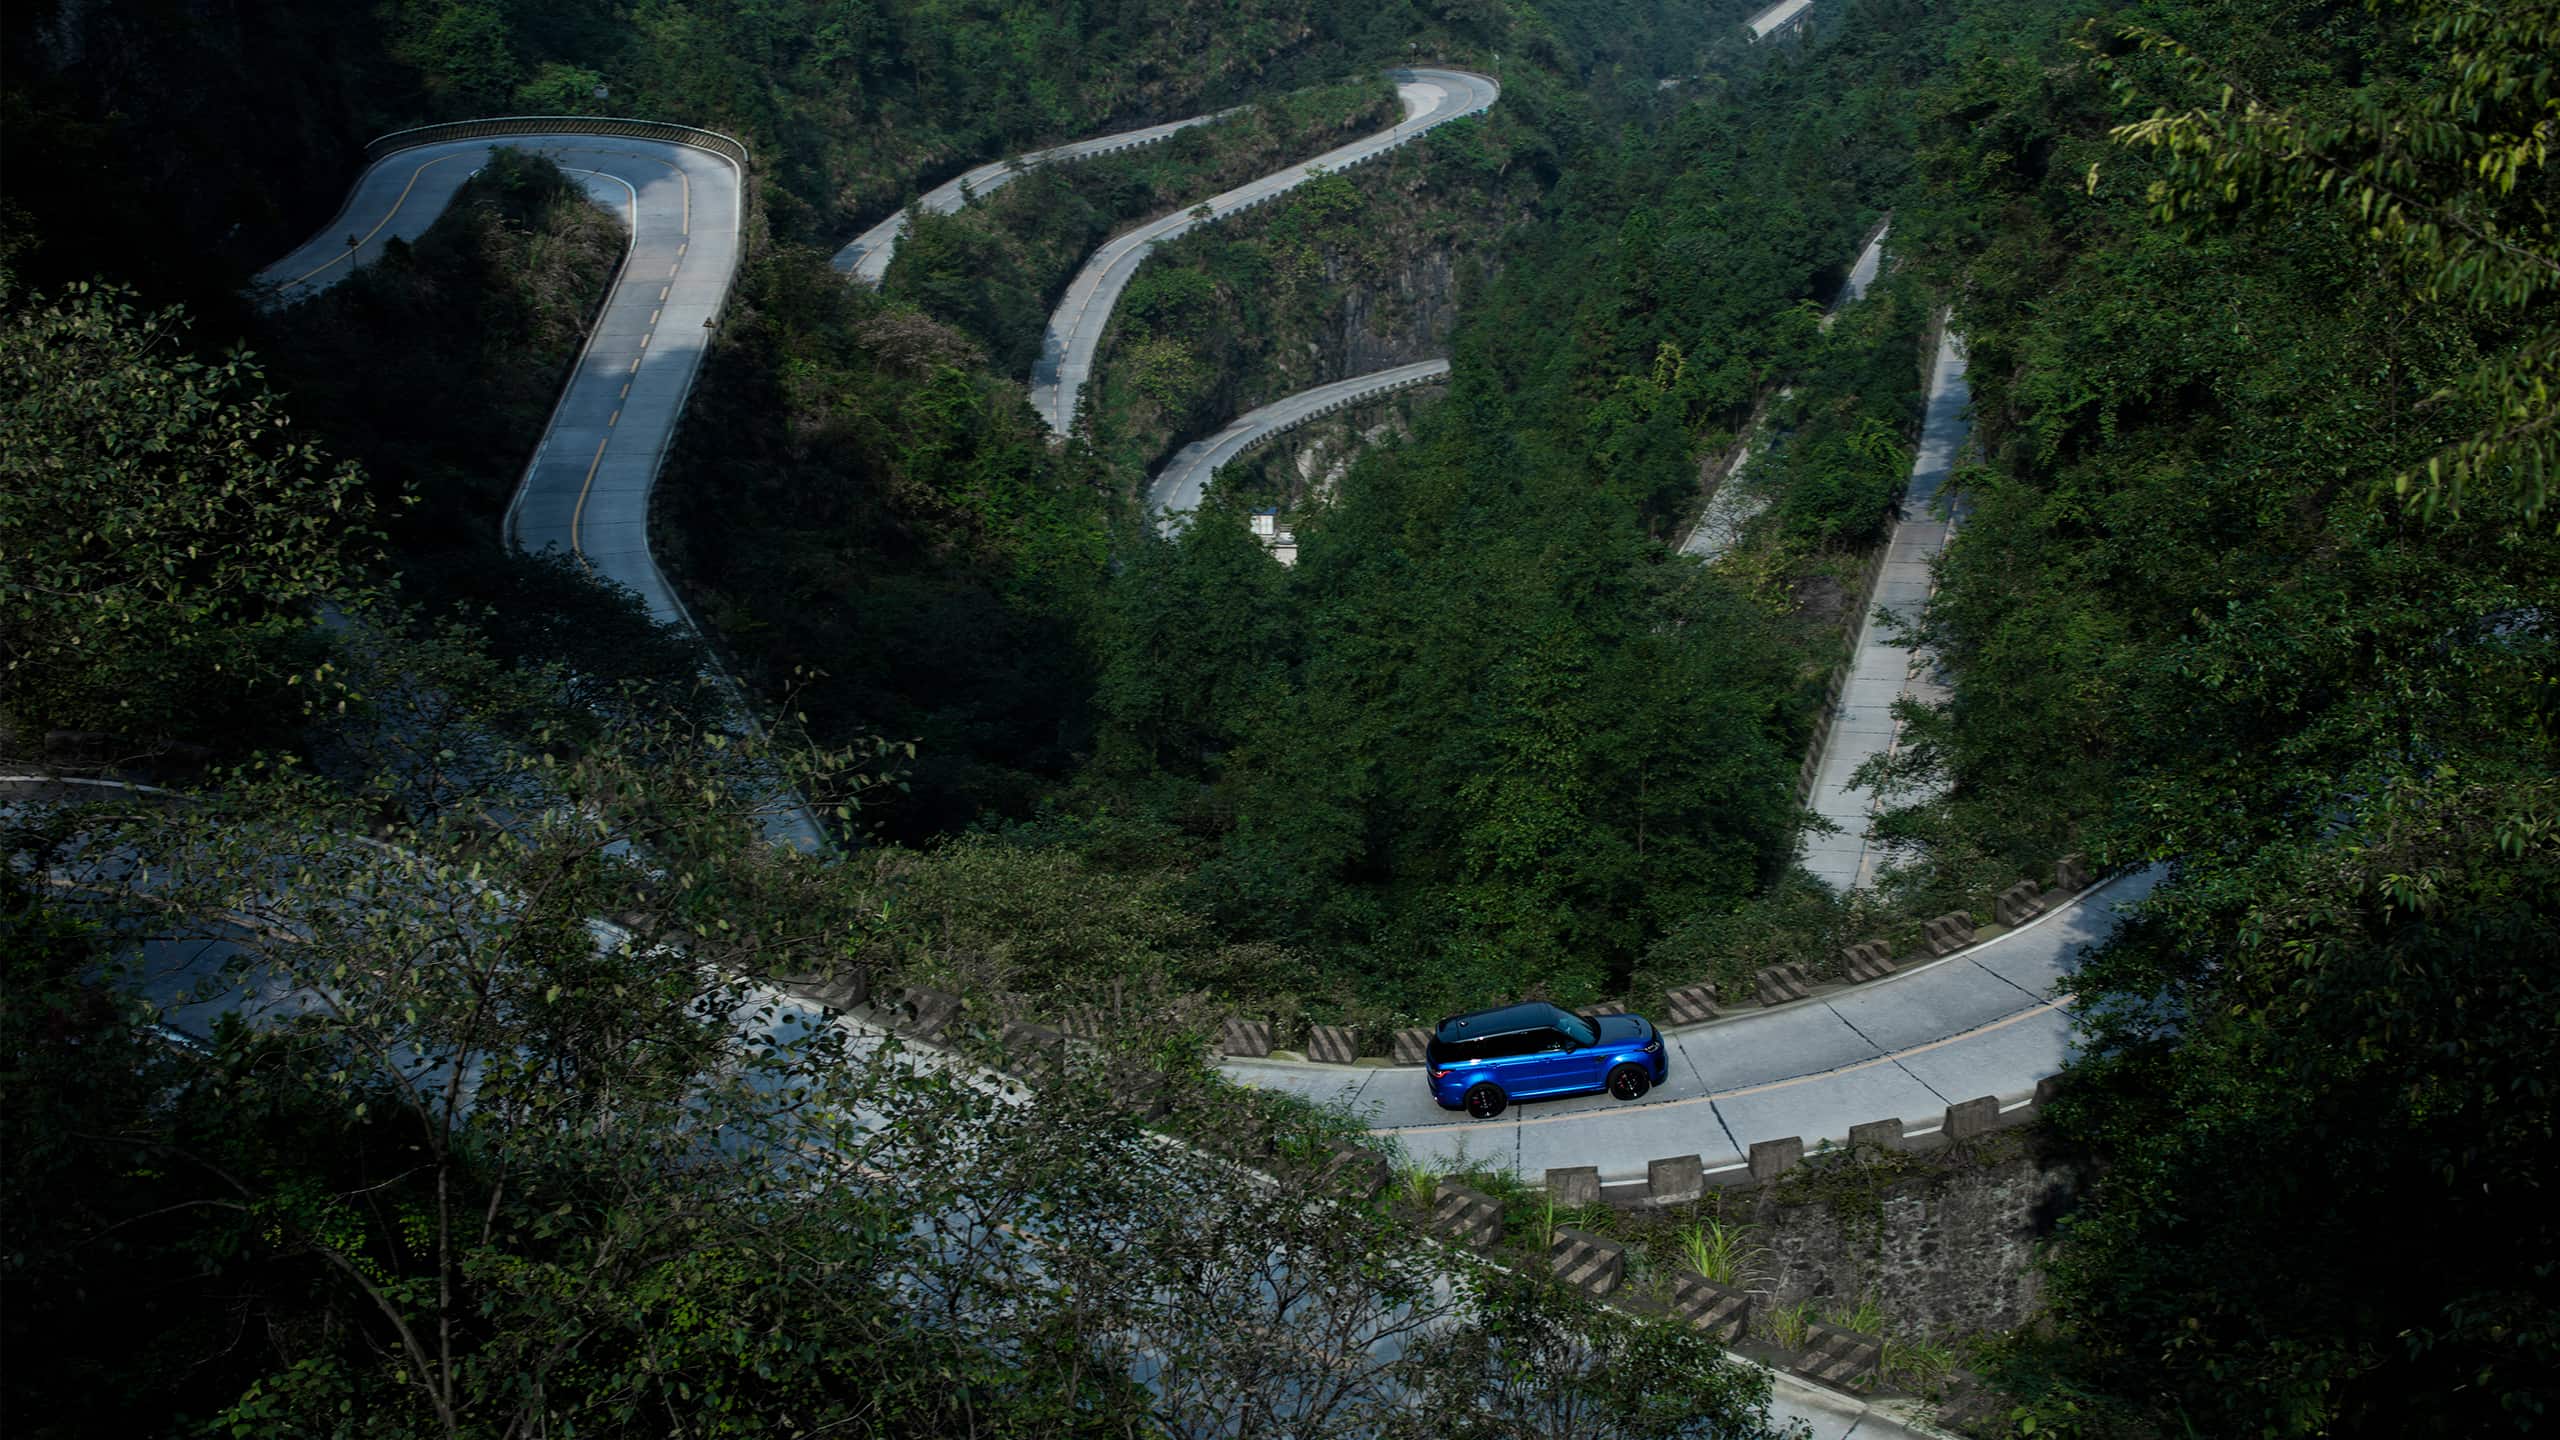 Range Rover drive crosses the Hill road